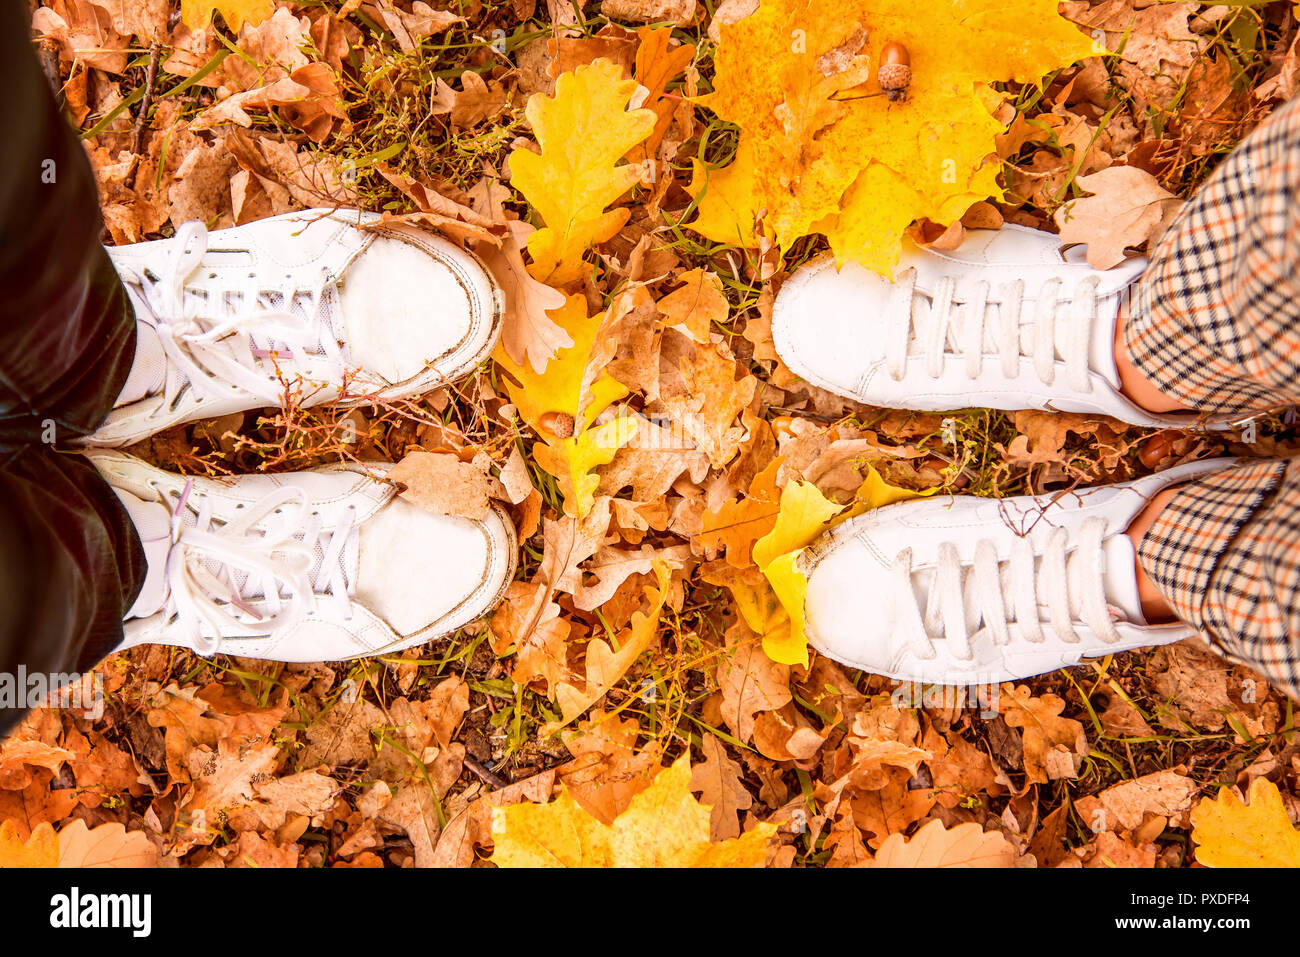 top view of male and female feet in white leather sneakers standing opposite each other on yellow and orange autumn leaves in park Stock Photo